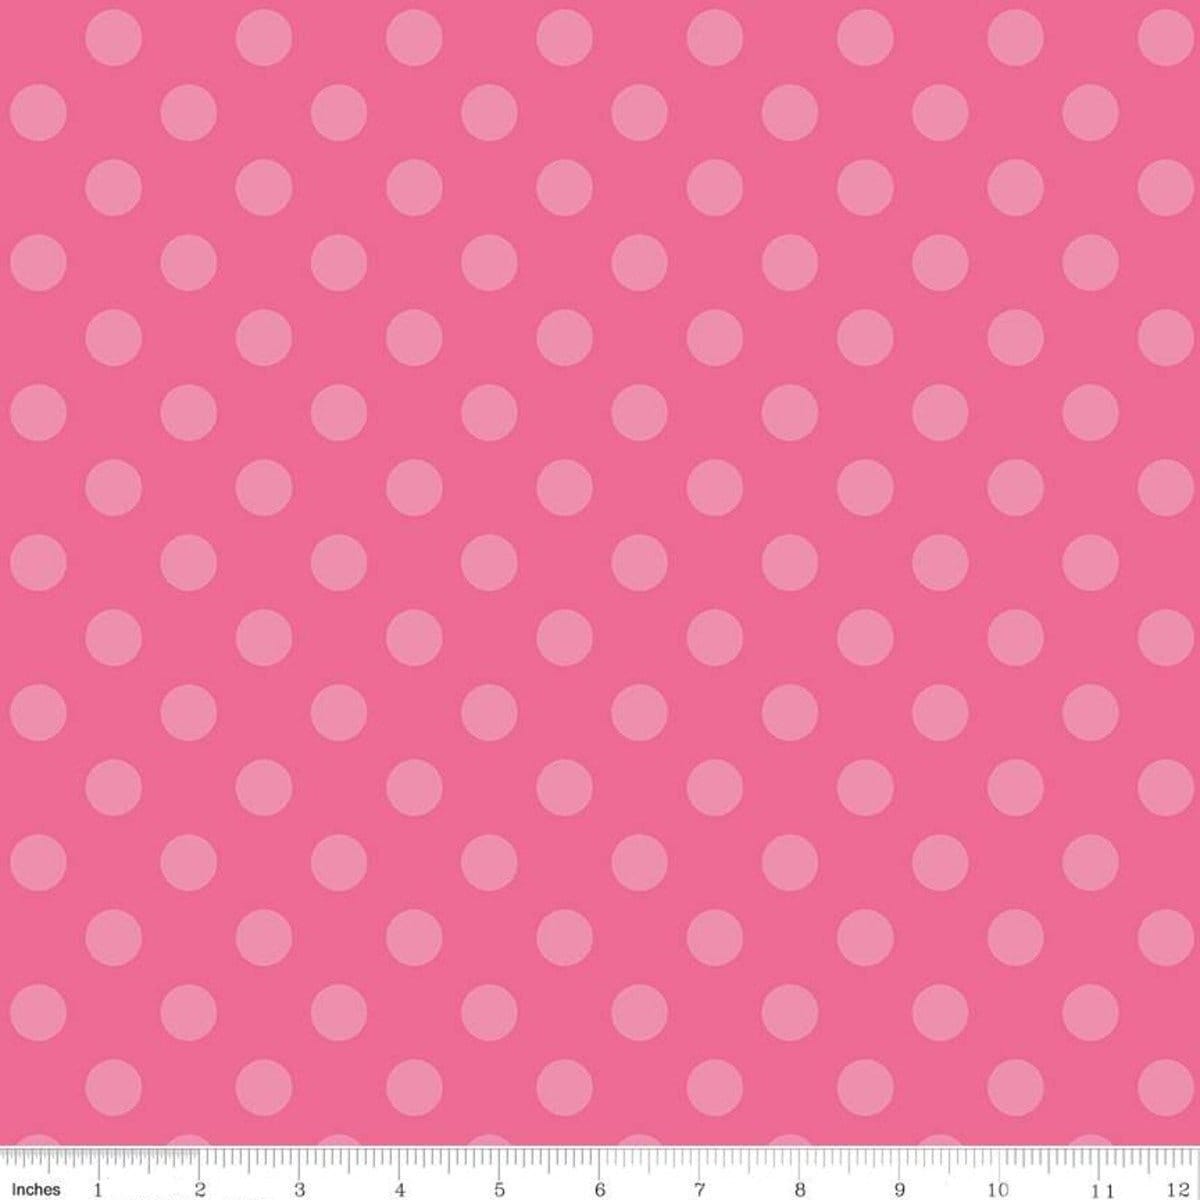 LAMINATED cotton fabric - Pink tonal dots (sold continuous by the half yard) Basic, Food Safe Fabric, BPA free